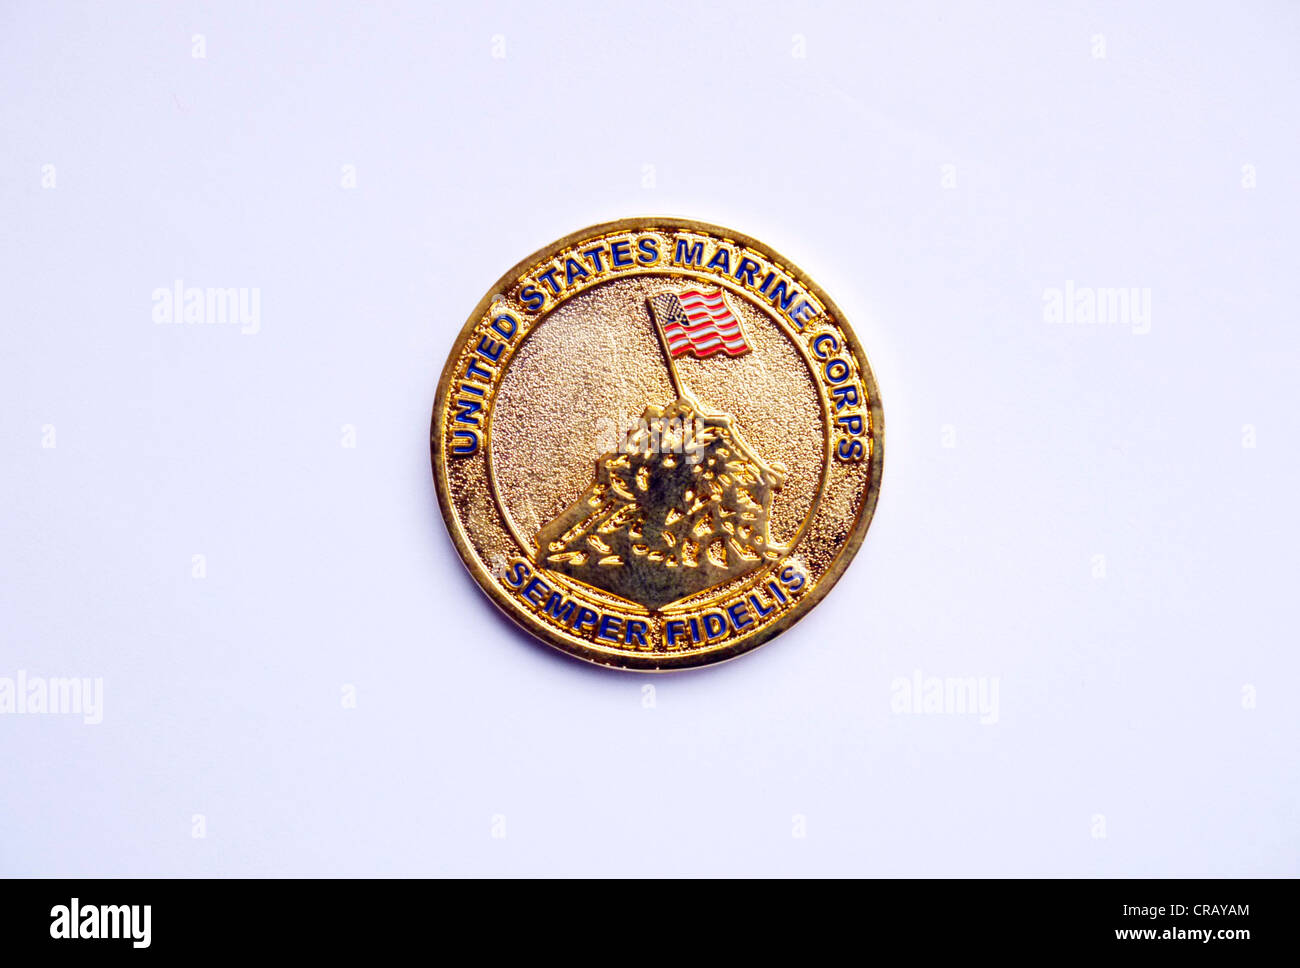 A United States Marine Corps Coin. Stock Photo